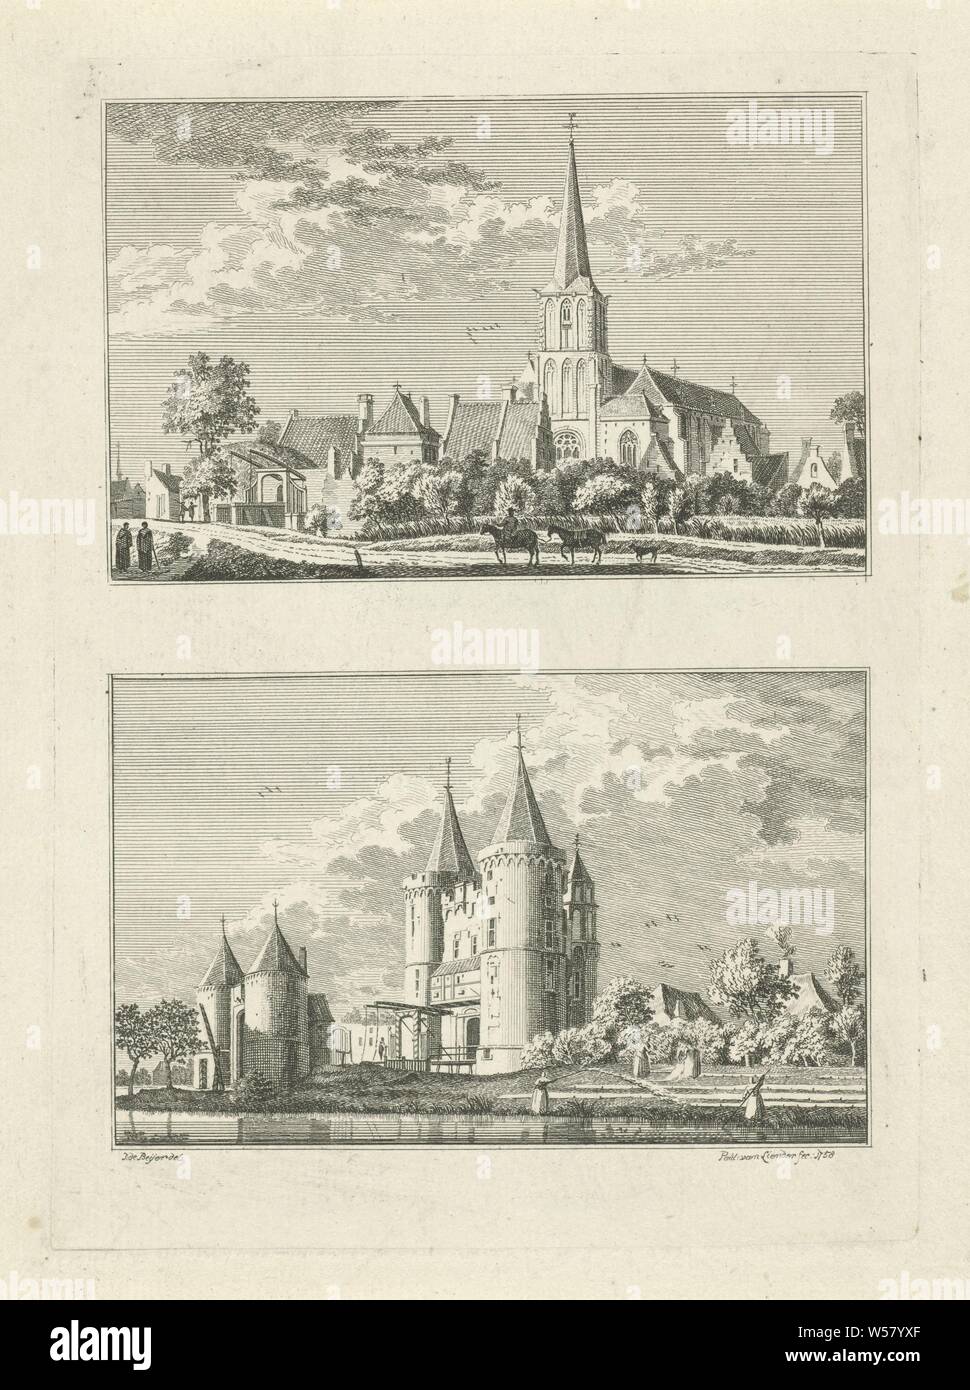 Kleefse and Hanselersche Poort in Kalker Village and townscapes in Kleve (series title), Two performances of one One plate. Views of the Kleefse Poort (above) and the Hanselersche Poort (below) in Kalkar, Germany. The print is part of a 100-part series with views of villages and towns in Kleef., City view, and landscape with man-made constructions, city-gate, Kalkar, Paulus van Liender (mentioned on object), 1758, paper, etching, h 205 mm × w 150 mm Stock Photo